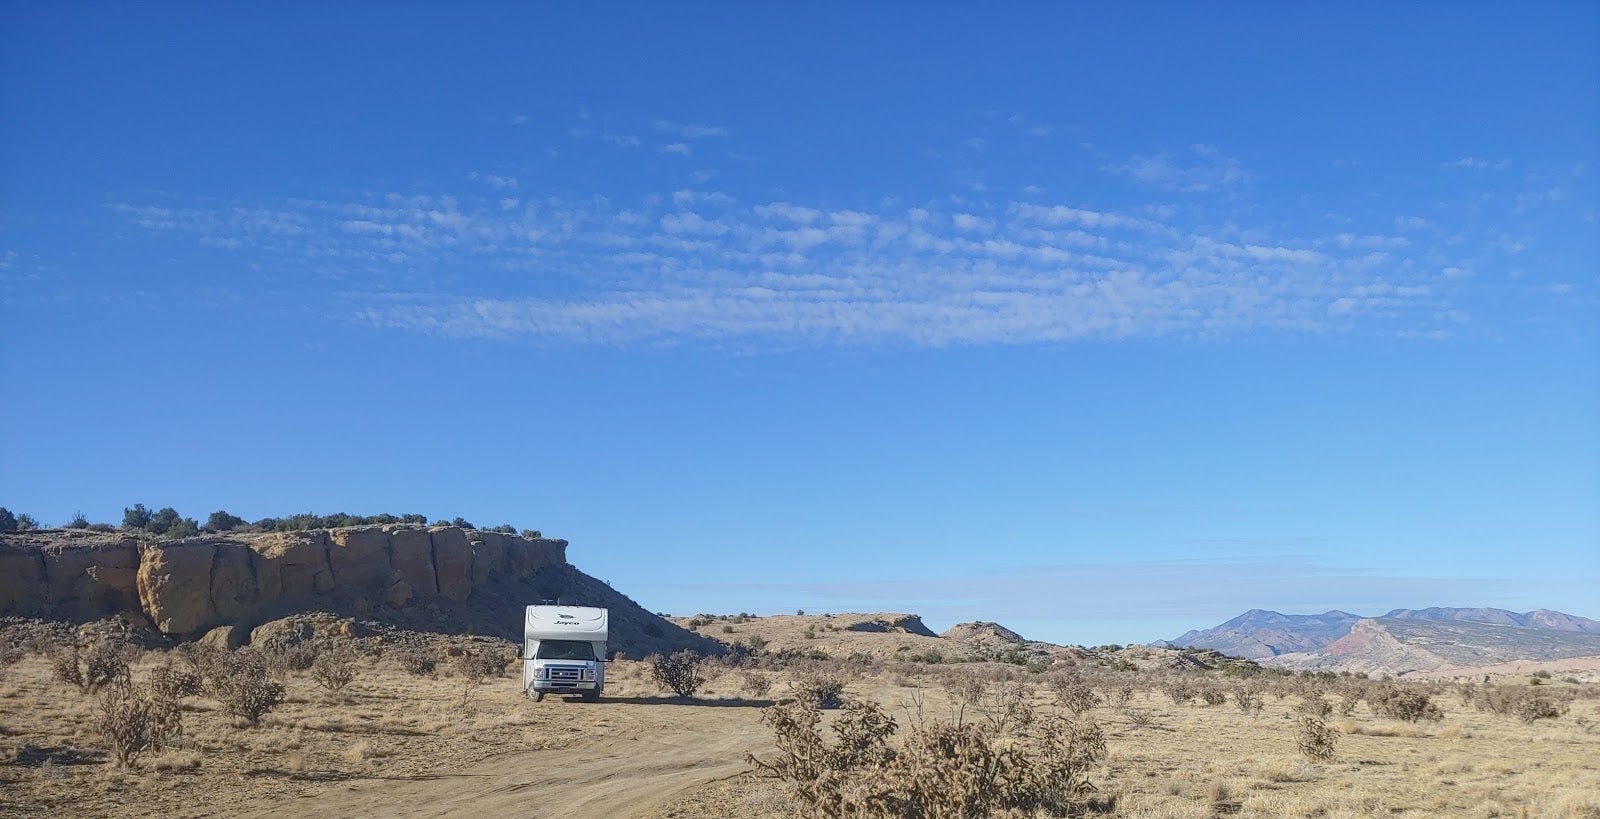 Camper submitted image from BLM dispersed camping / Zia Pueblo - 2